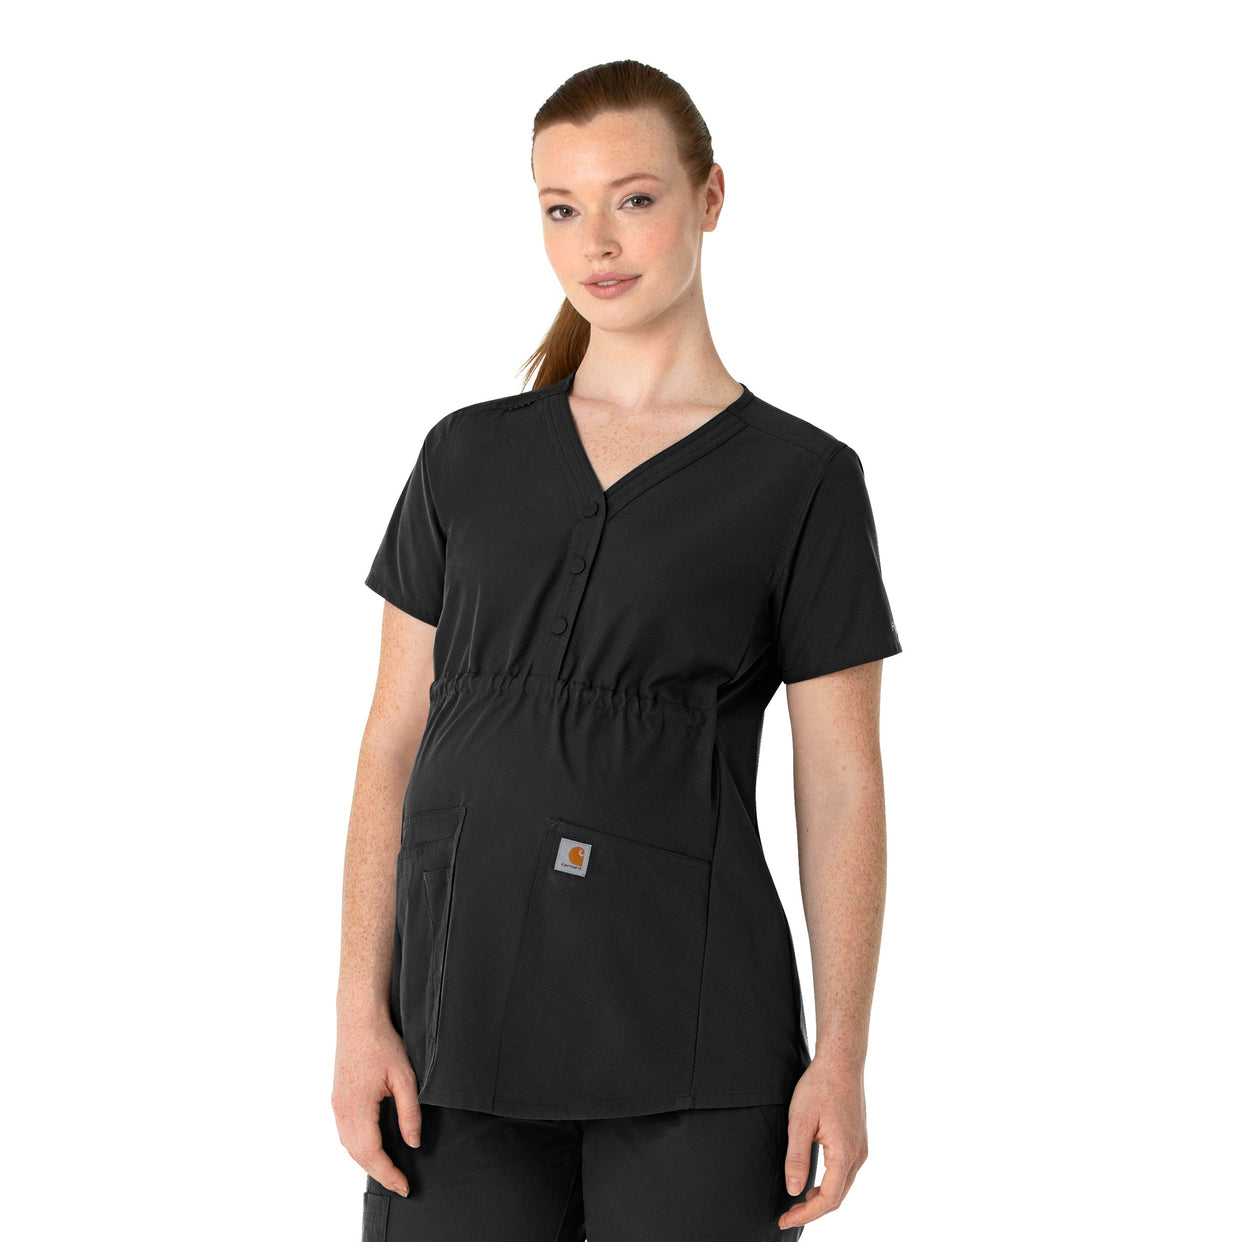 Force Essentials Women's Henley Maternity Scrub Top Black side view